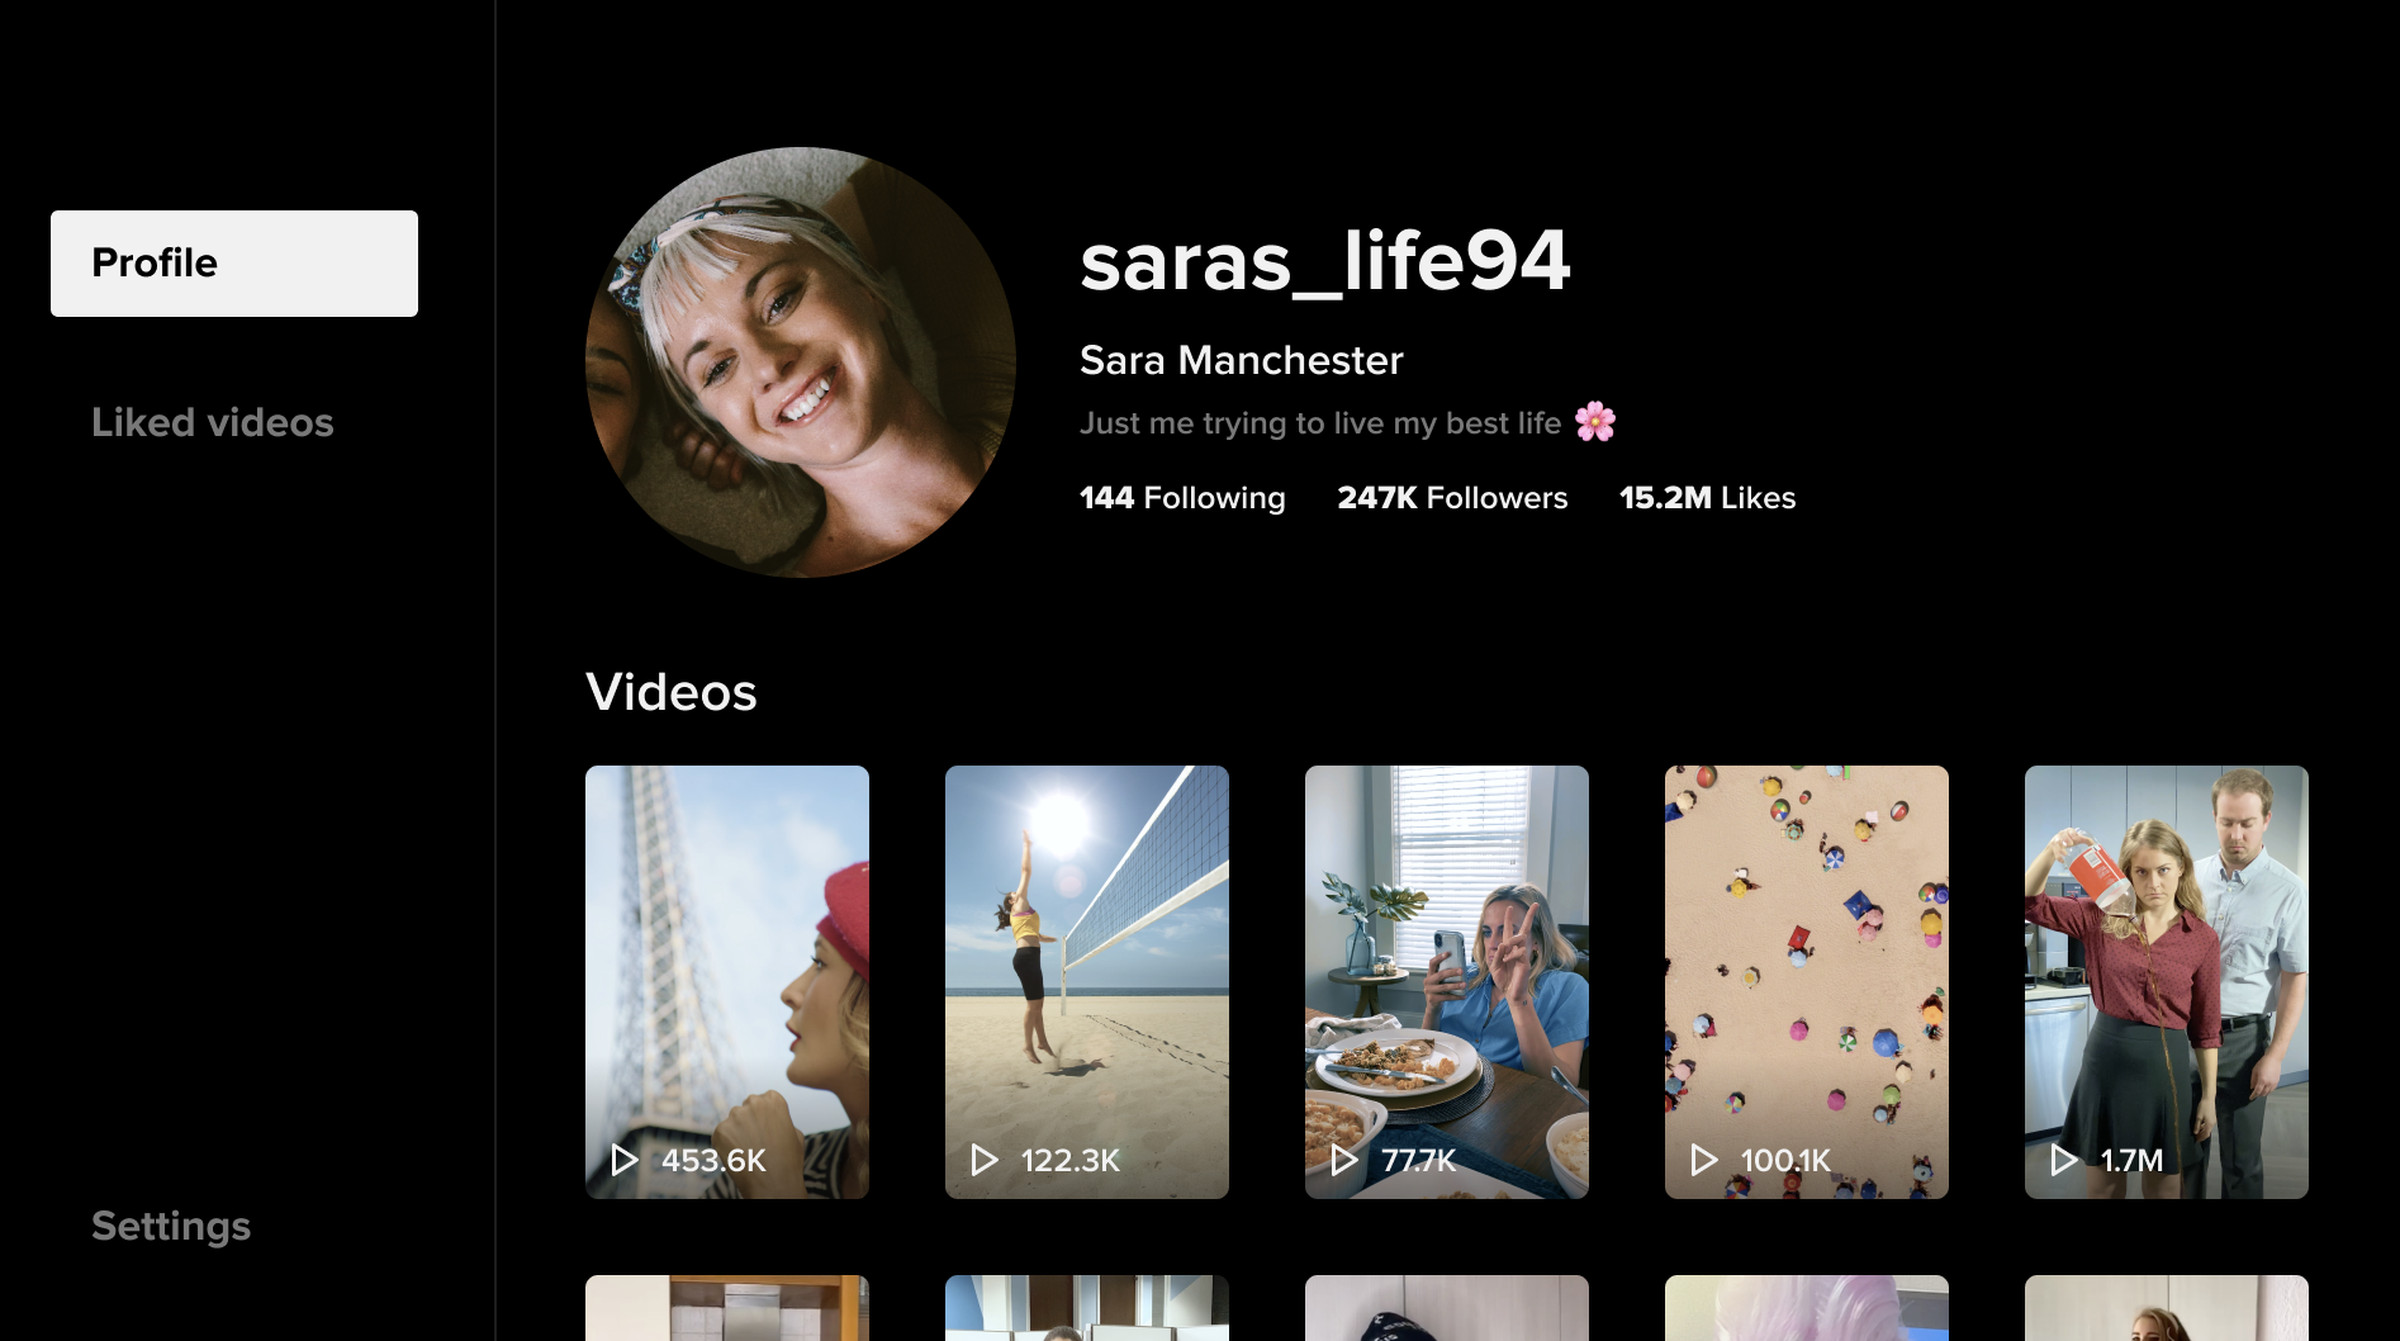 The Profile section of the Android TV TikTok app.